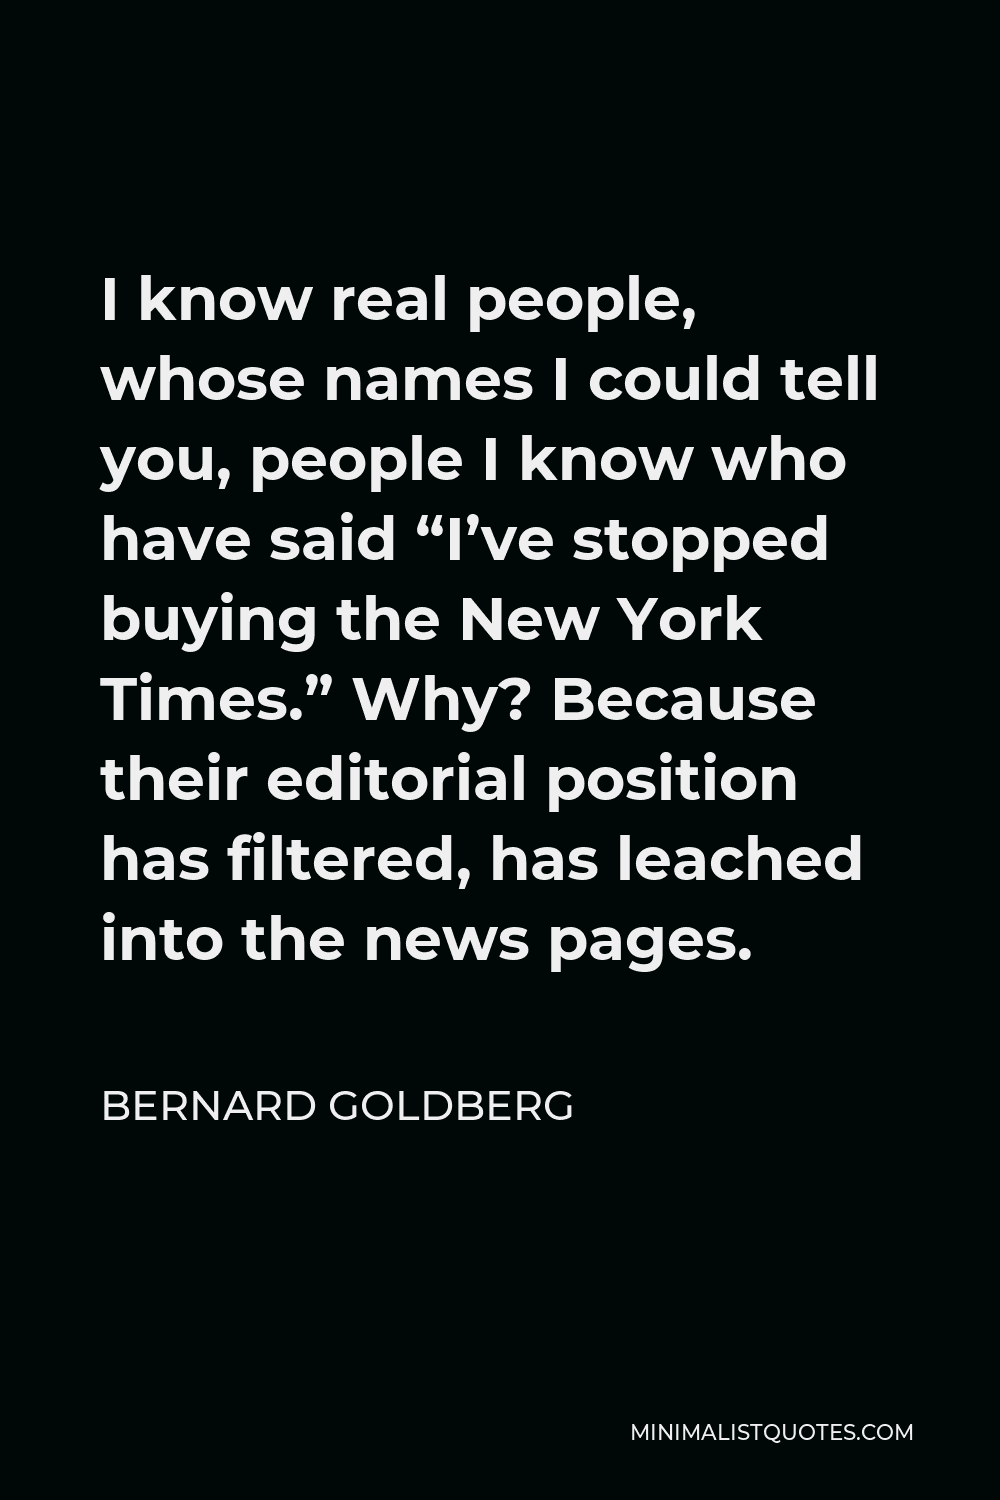 Bernard Goldberg Quote - I know real people, whose names I could tell you, people I know who have said “I’ve stopped buying the New York Times.” Why? Because their editorial position has filtered, has leached into the news pages.